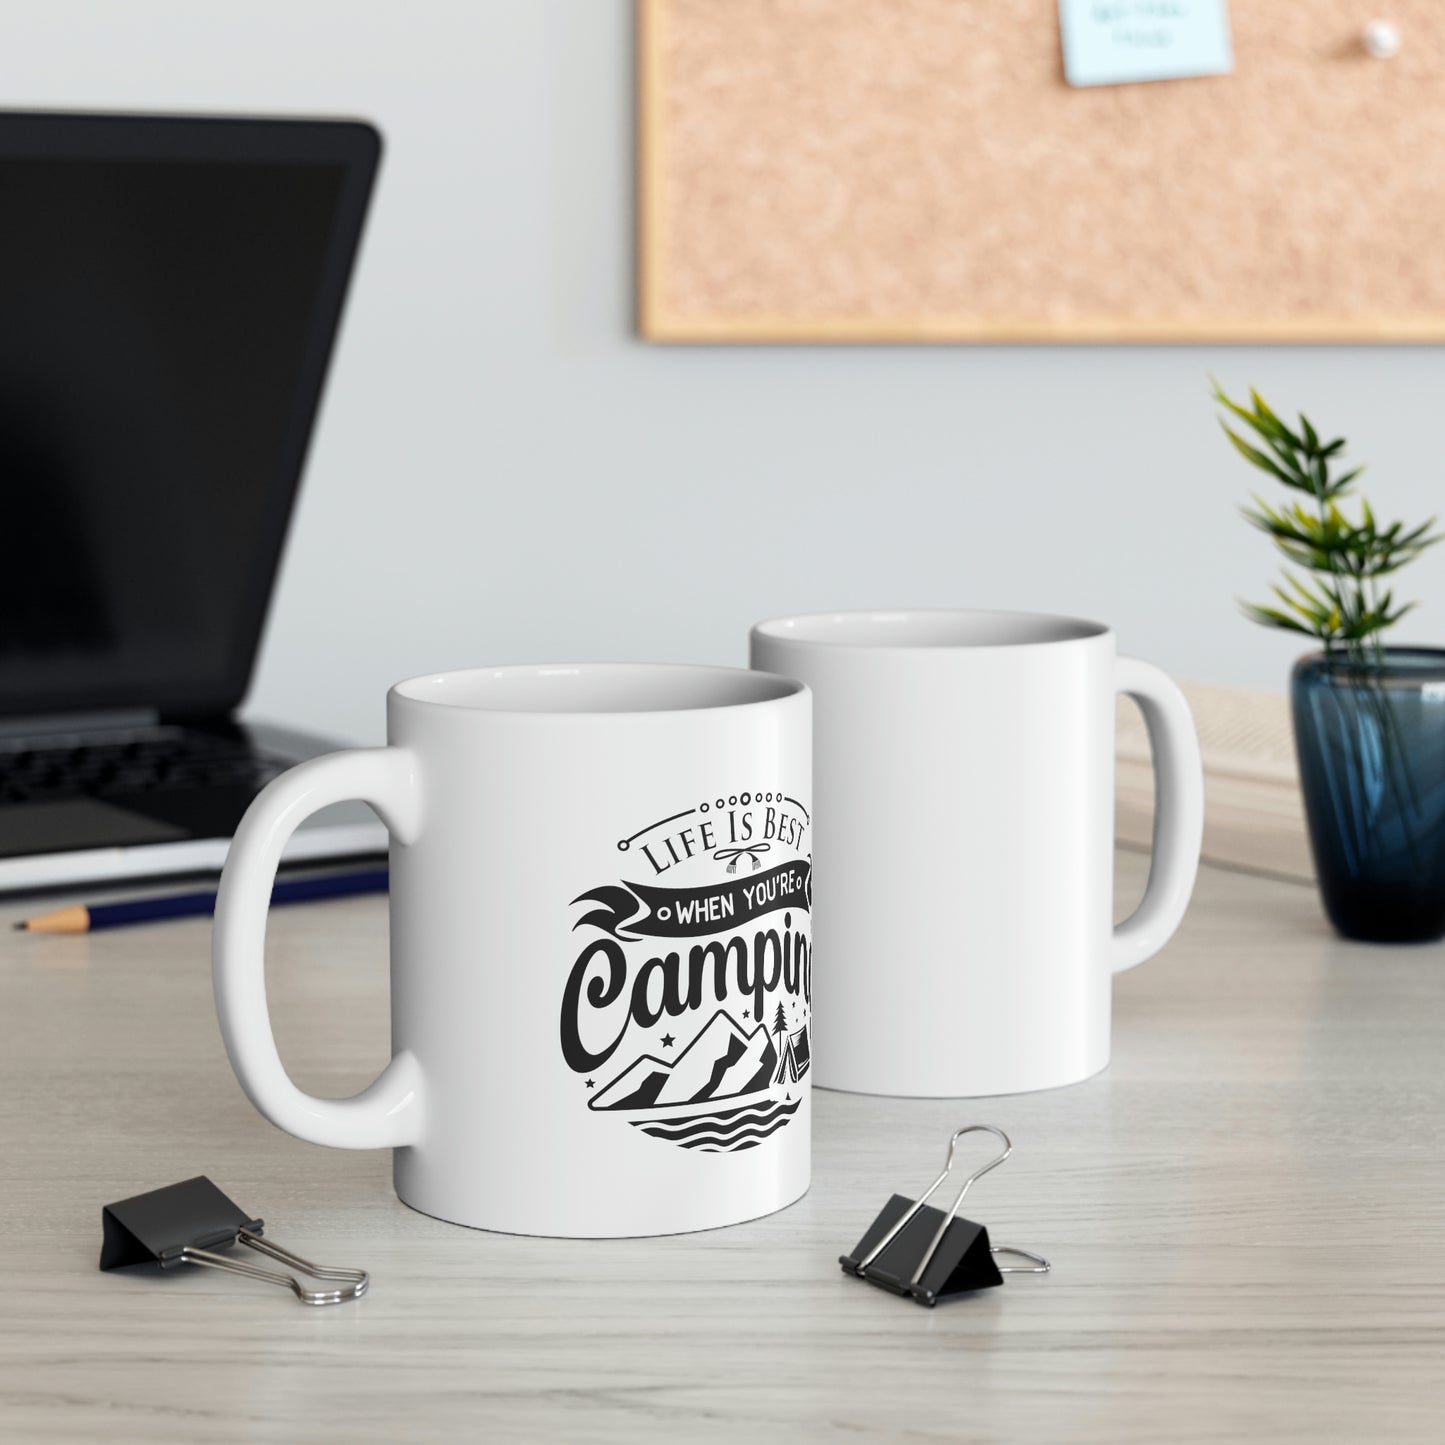 “Life Is Best When You’re” Coffee Mug - Weave Got Gifts - Unique Gifts You Won’t Find Anywhere Else!